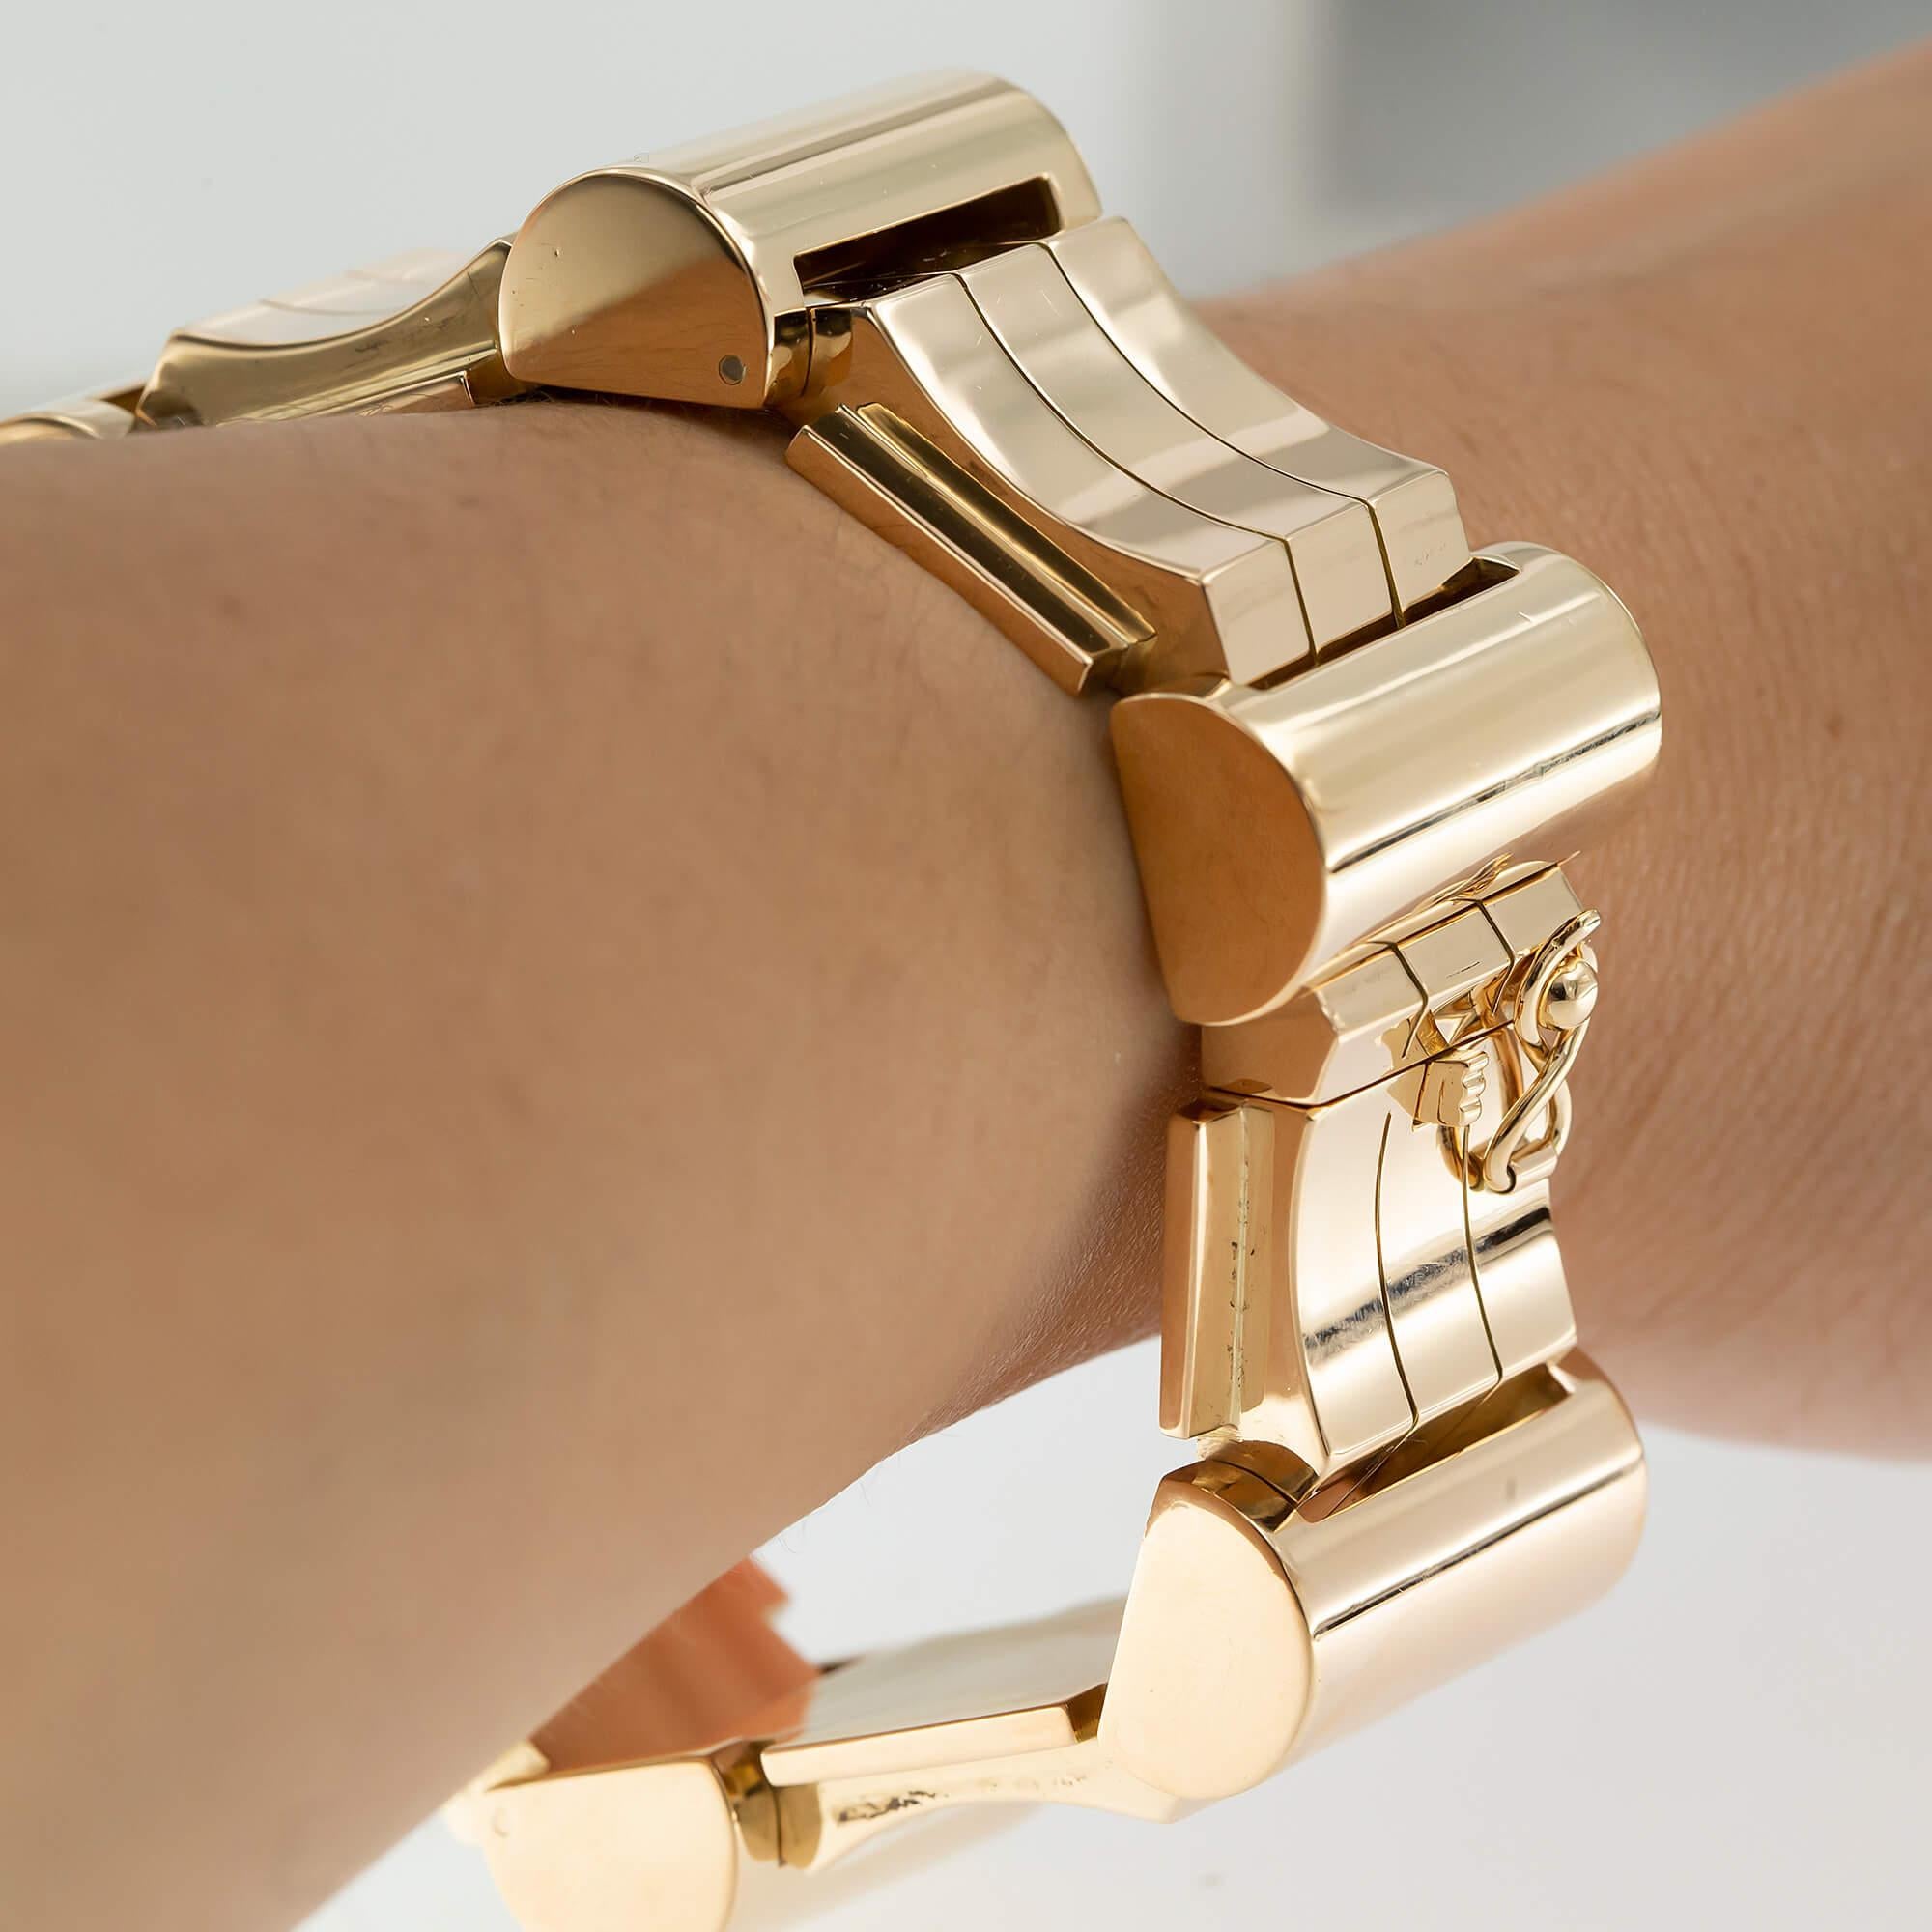 Retro articulated gold bracelet with concave and convex alternating links, box and tongue snap with figure 8 safety catch.
This is a stylish bracelet. Its size alone makes quite the statement on the wrist. Perfect for the day or as a chunky addition